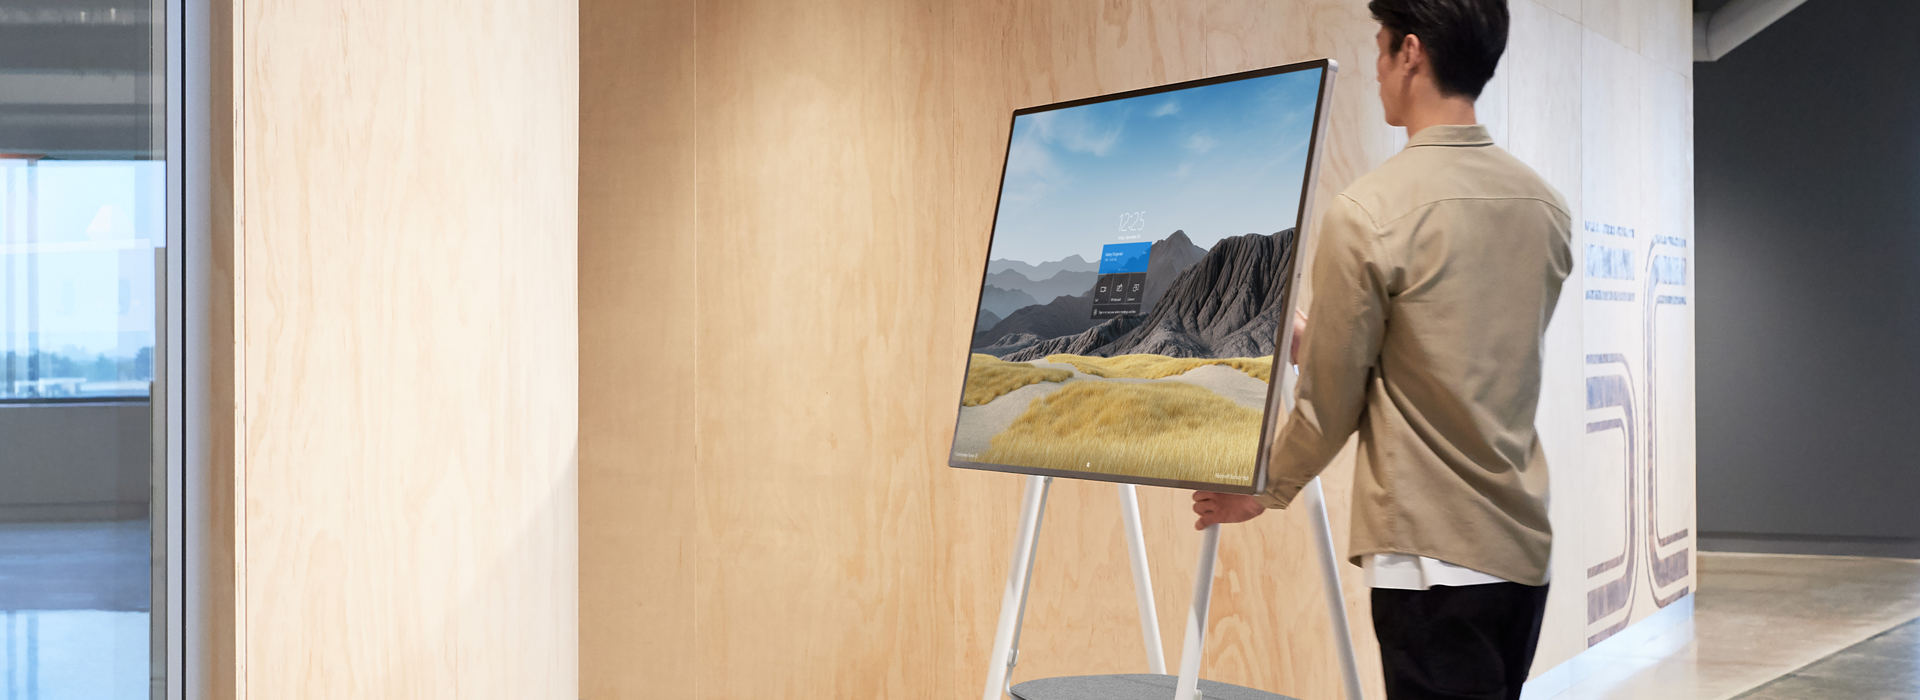 A man transports Surface Hub 2S on a mobile rolling stand